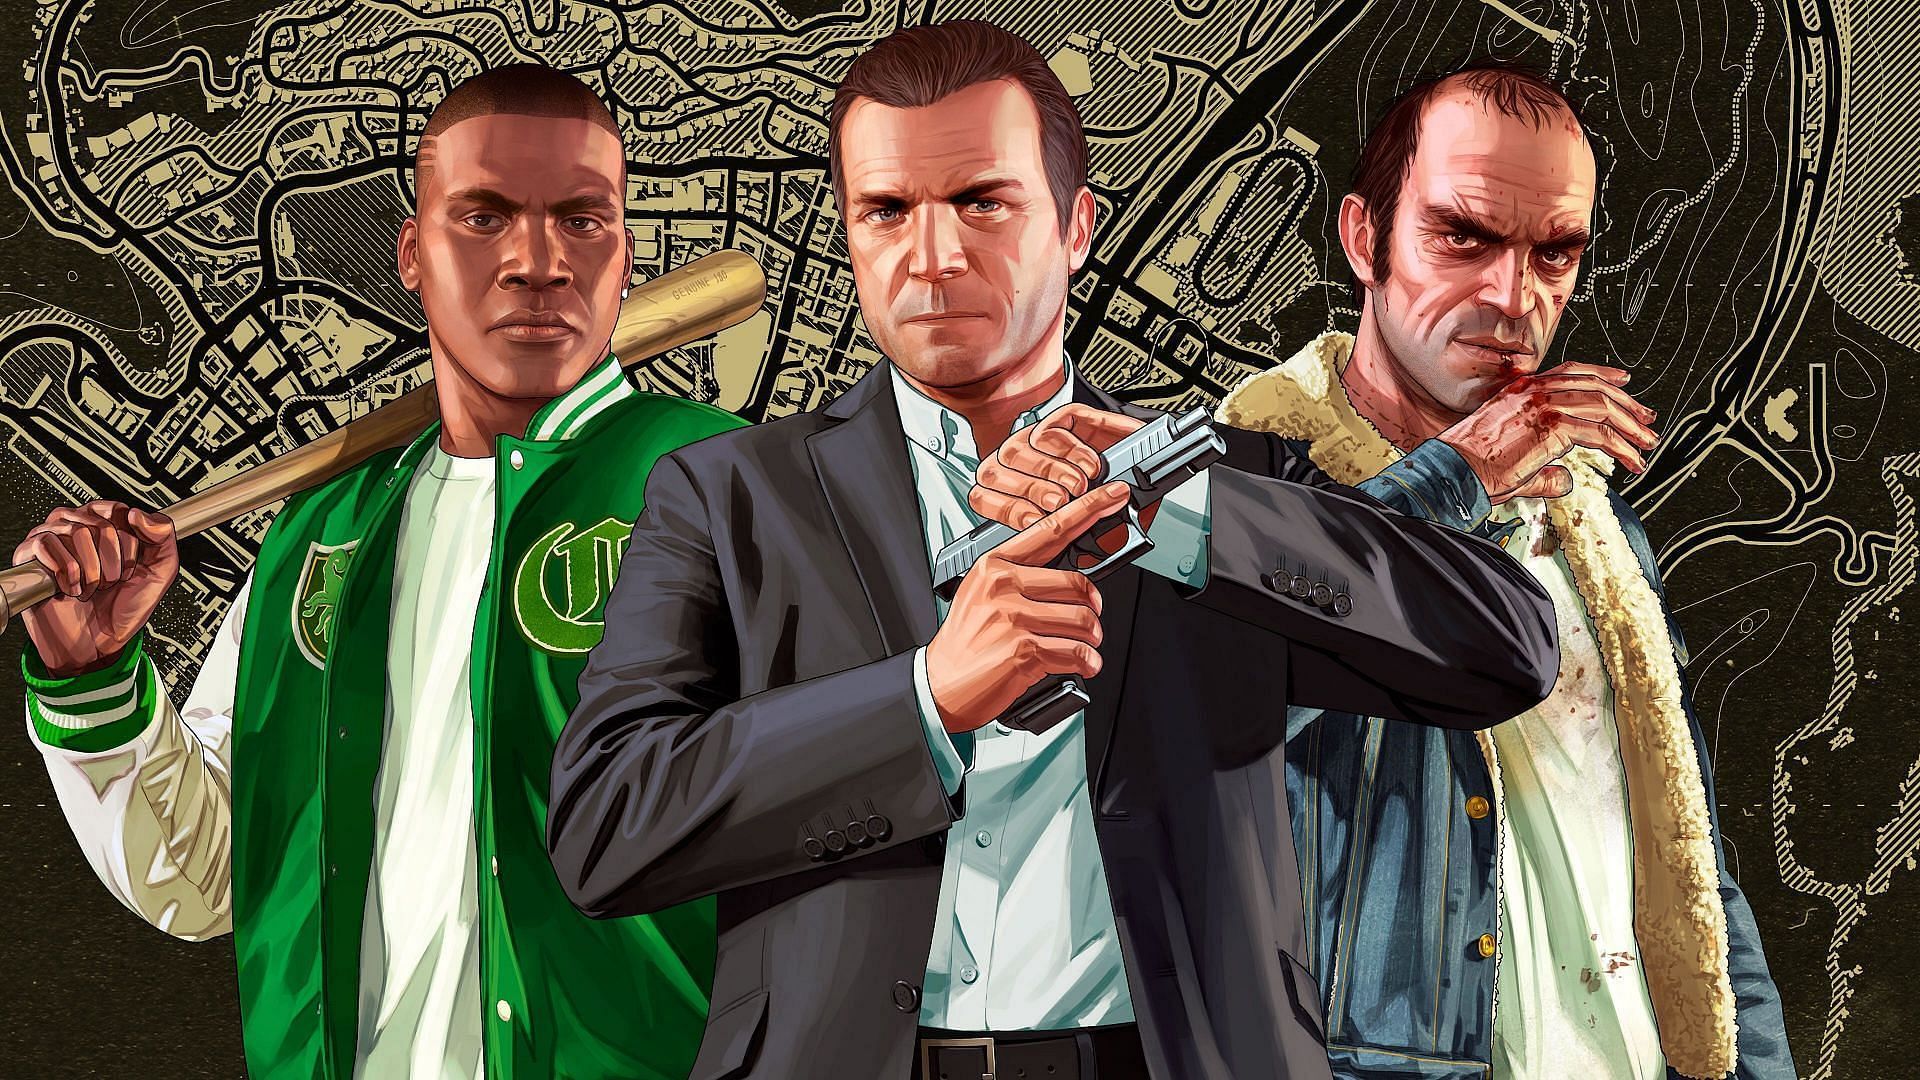 GTA 5 is coming to PS Plus Game Catalog (Image via Rockstar Games)